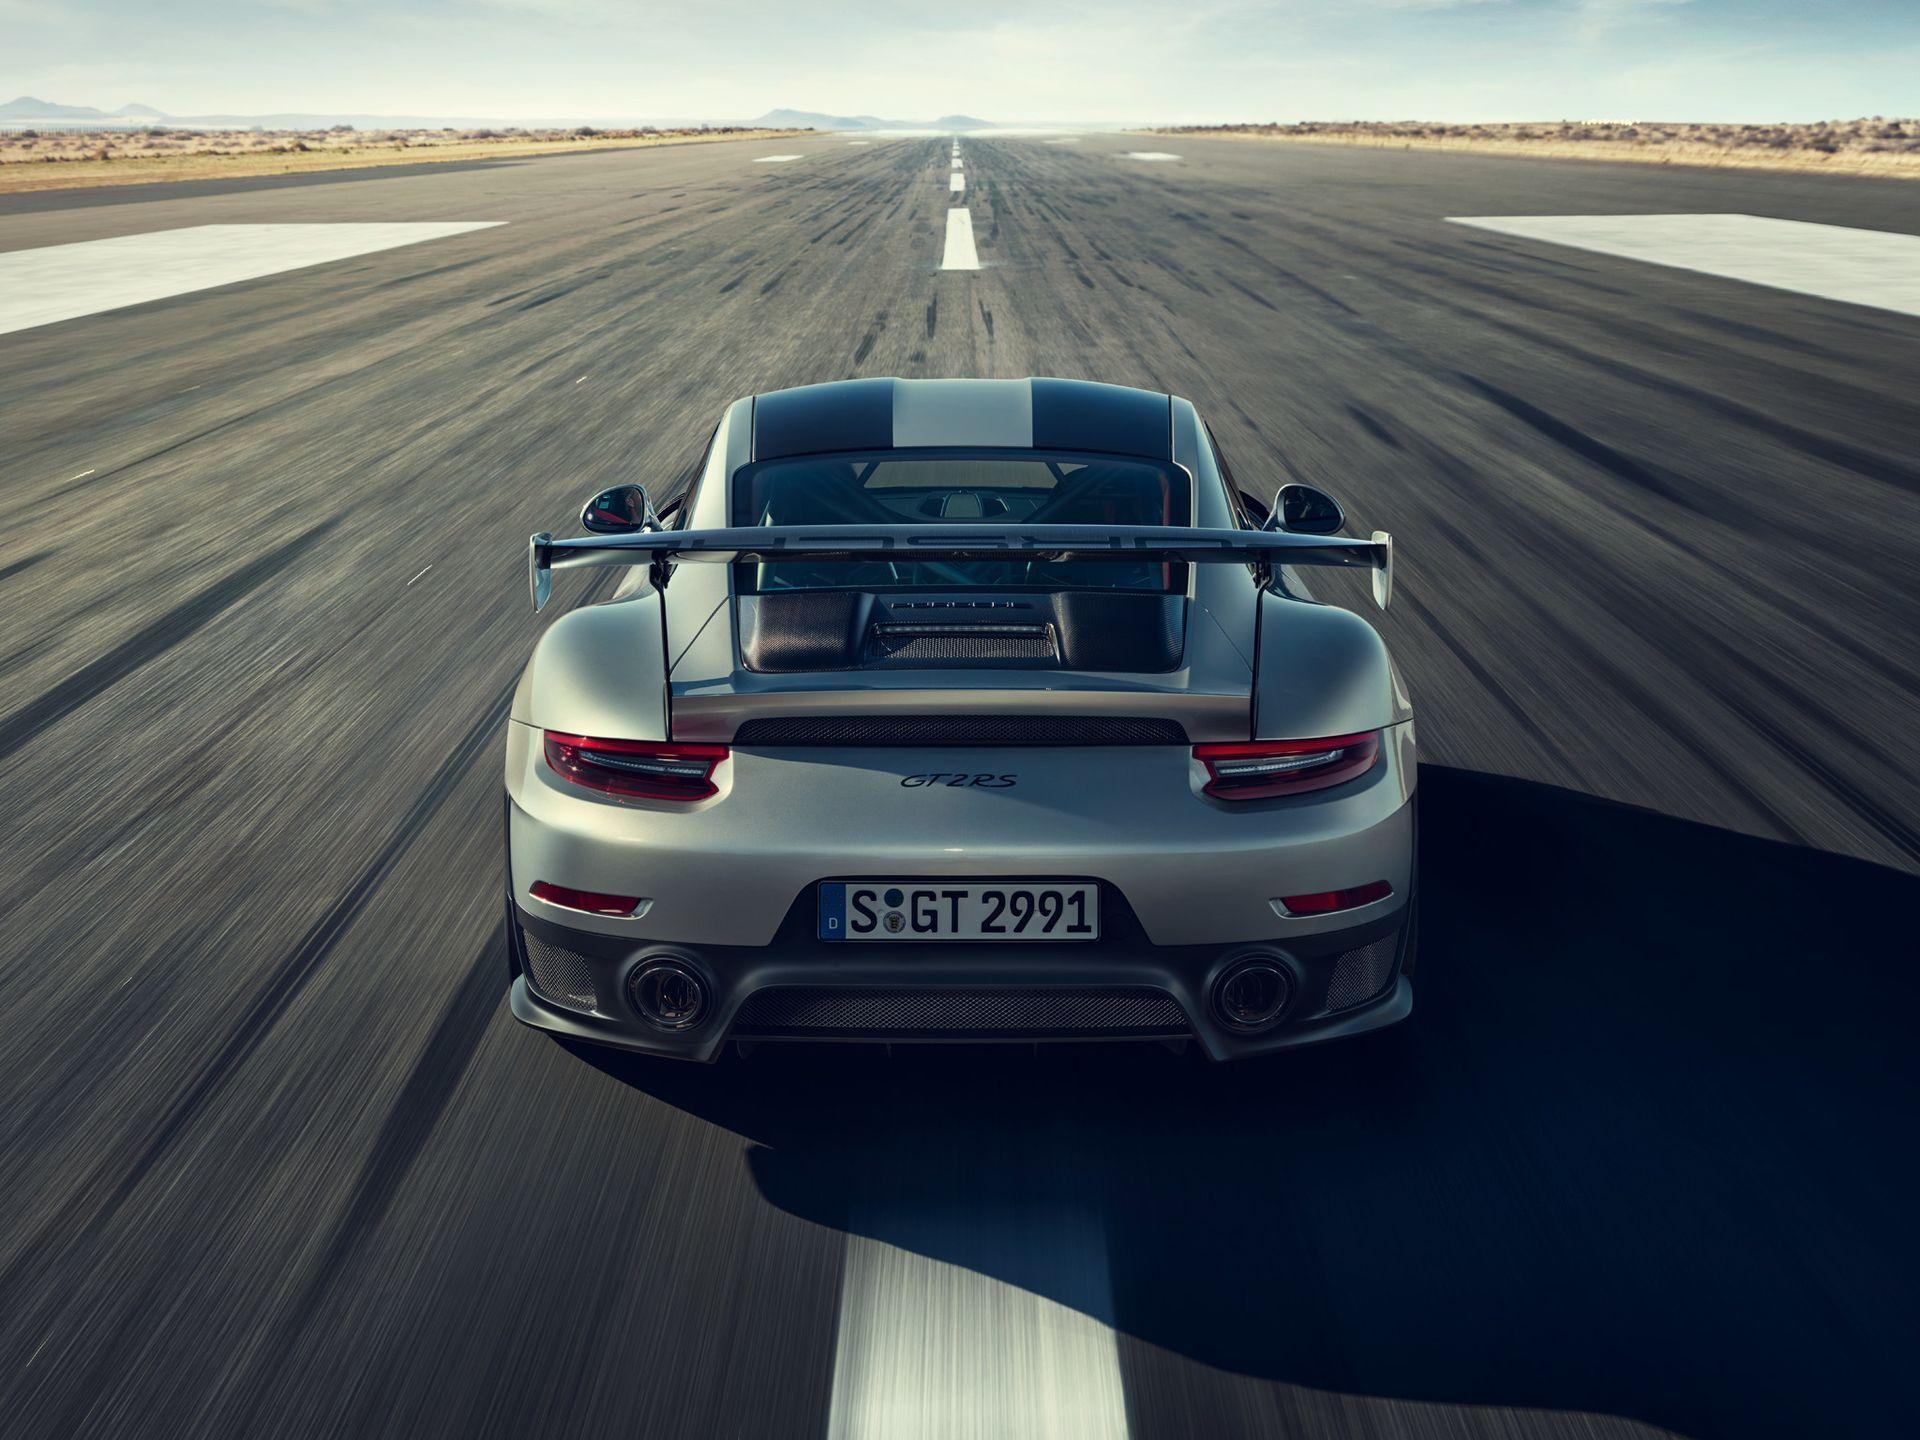 The head of the 911 family, the Porsche 911 GT2 RS, is coming back!